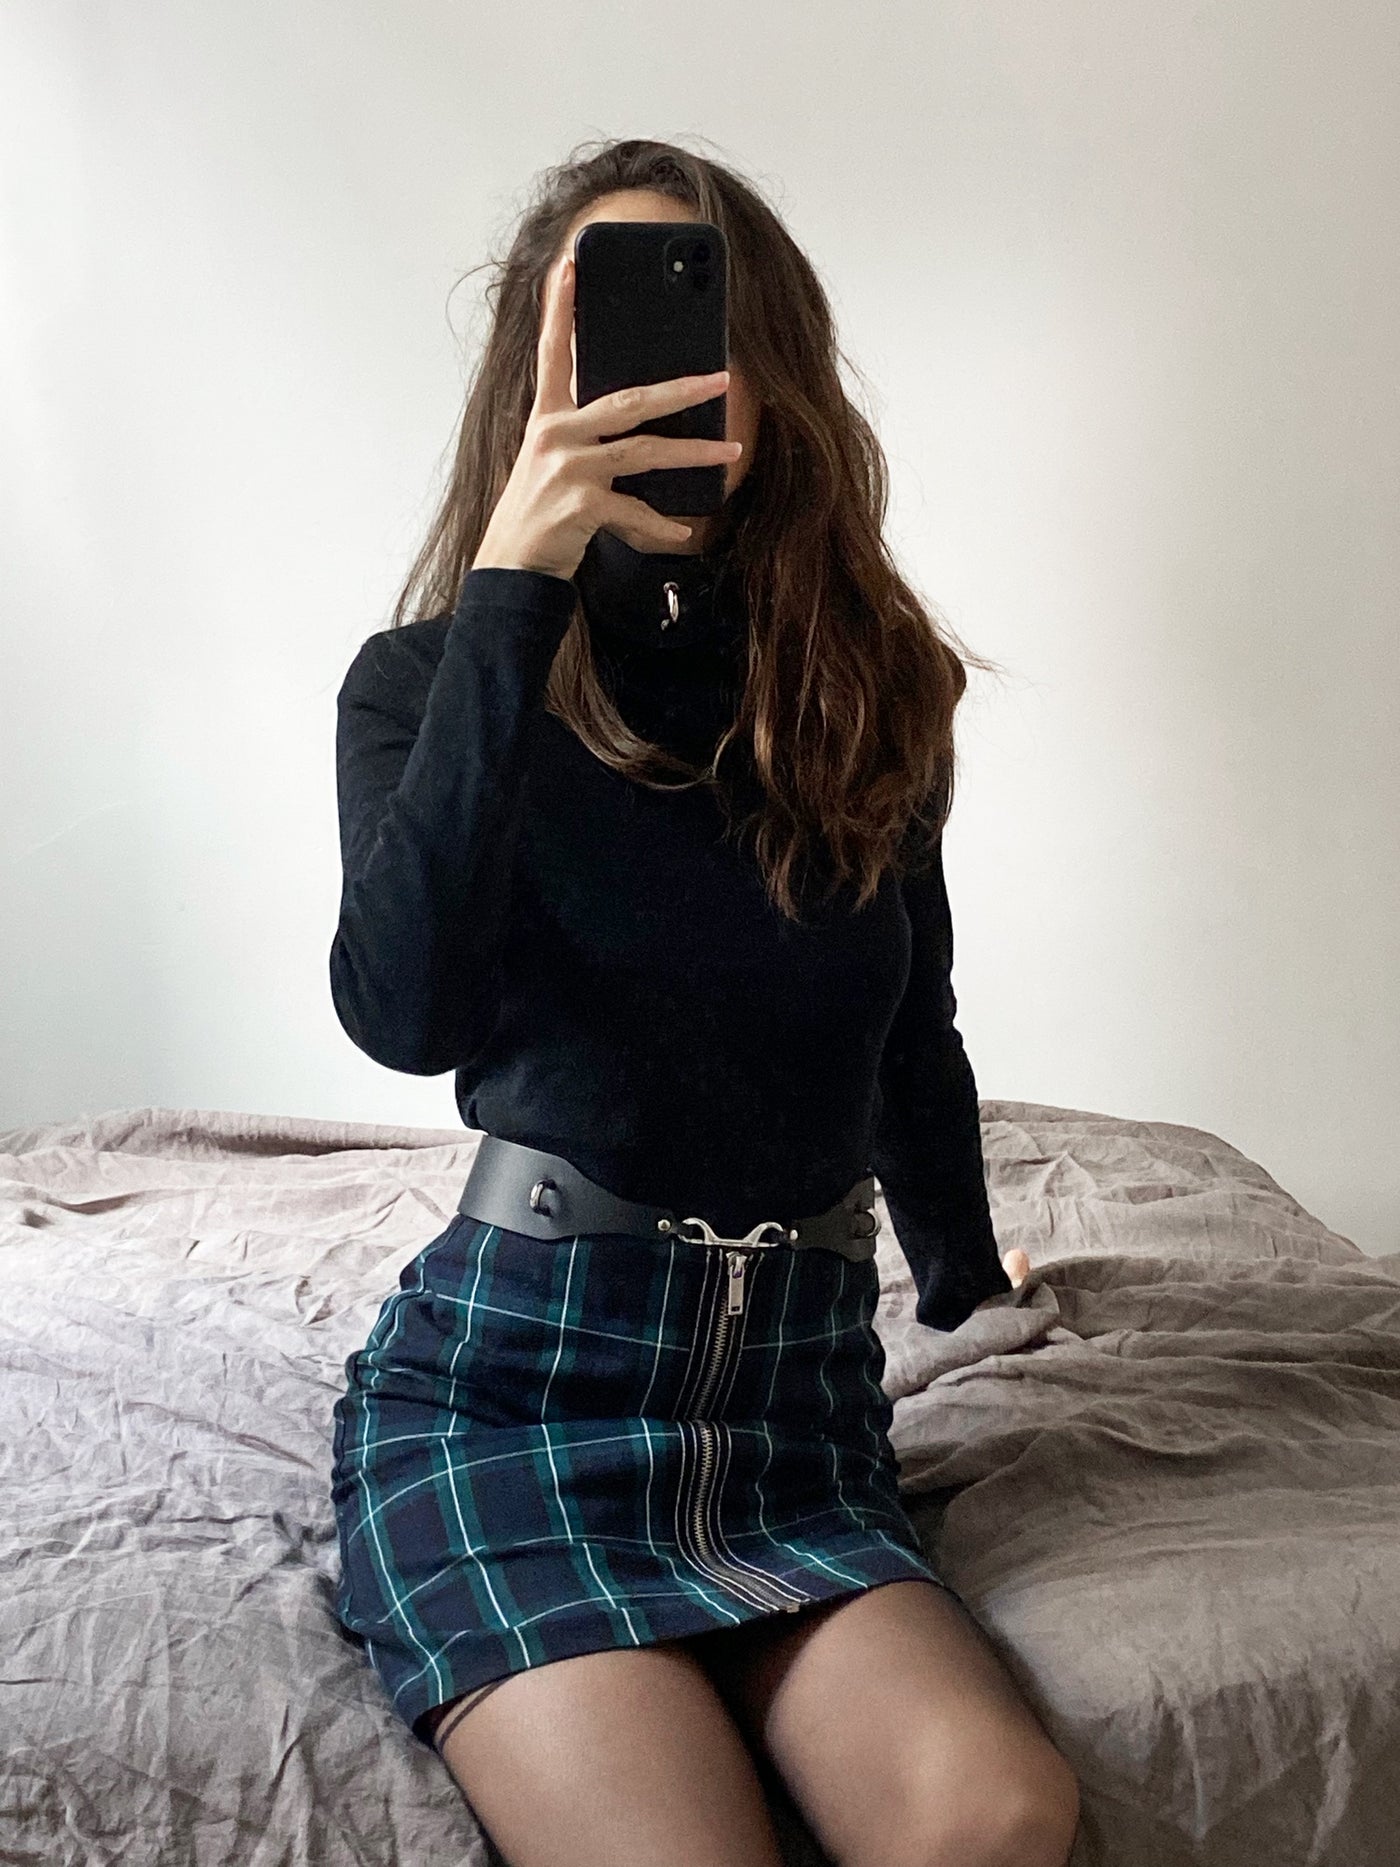 Camille taking a selfie while wearing the vegan Edenbelt by Baby turns Blue Paris